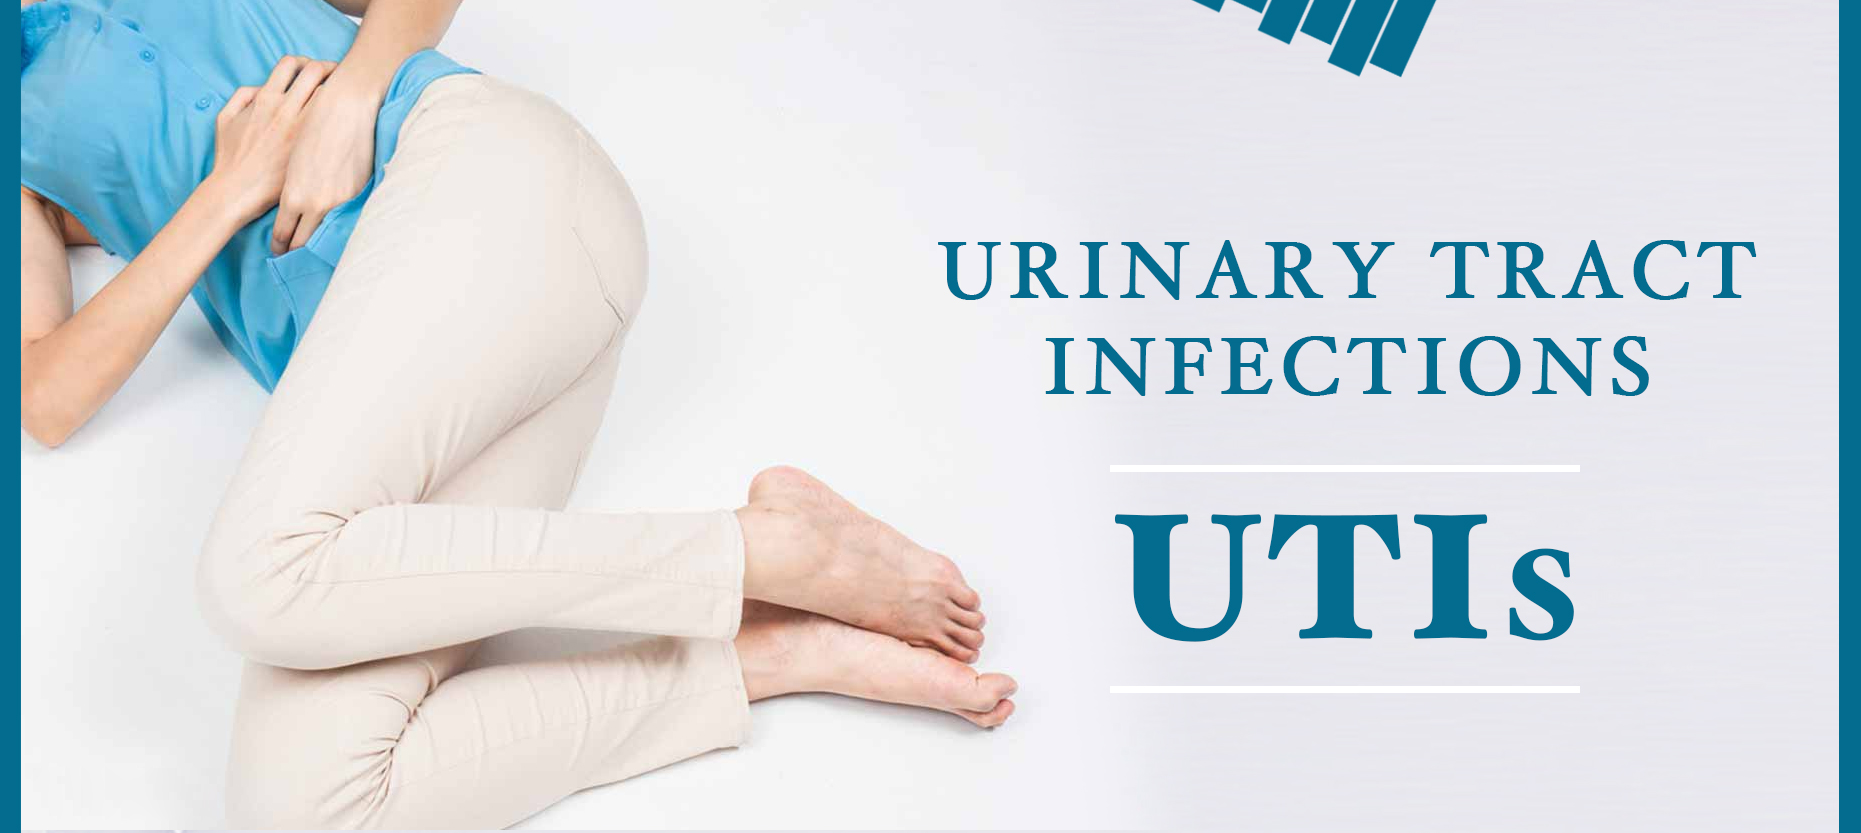 Urinary Tract Infection (UTIs): Causes, Symptoms, and Treatment